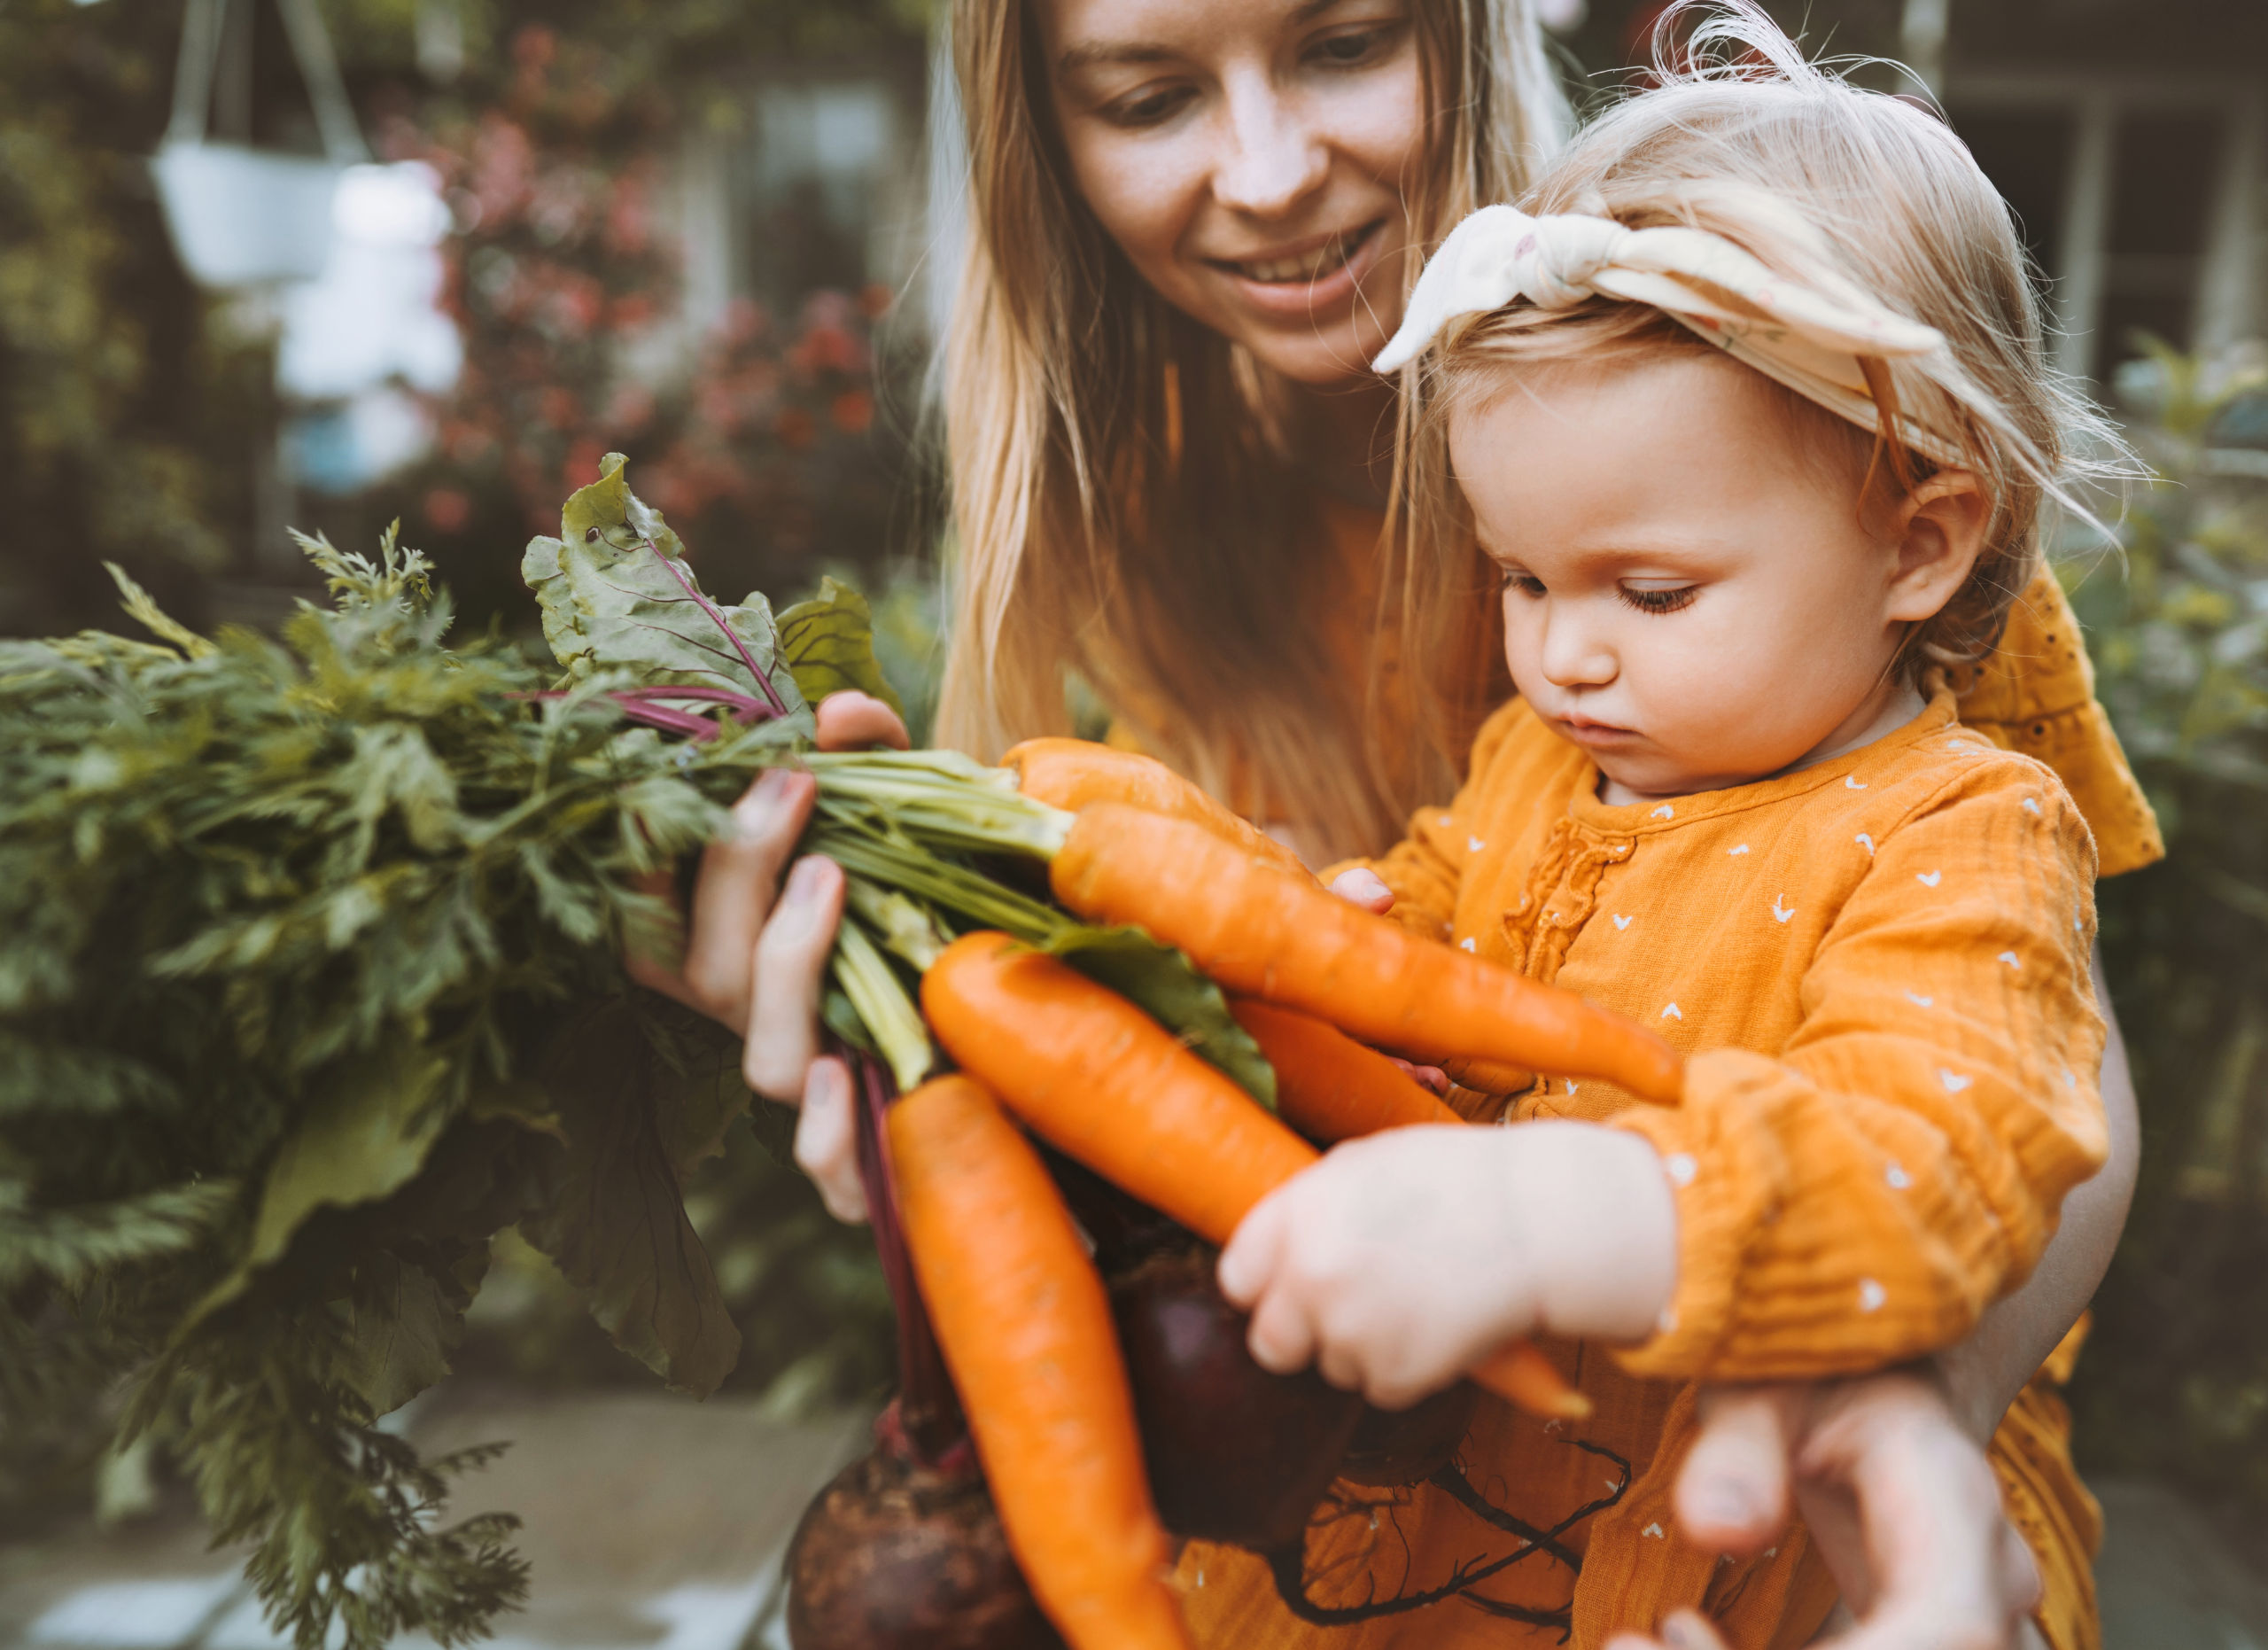 8 Easy Ways to Add Extra Veggies to Your Kid’s Meals